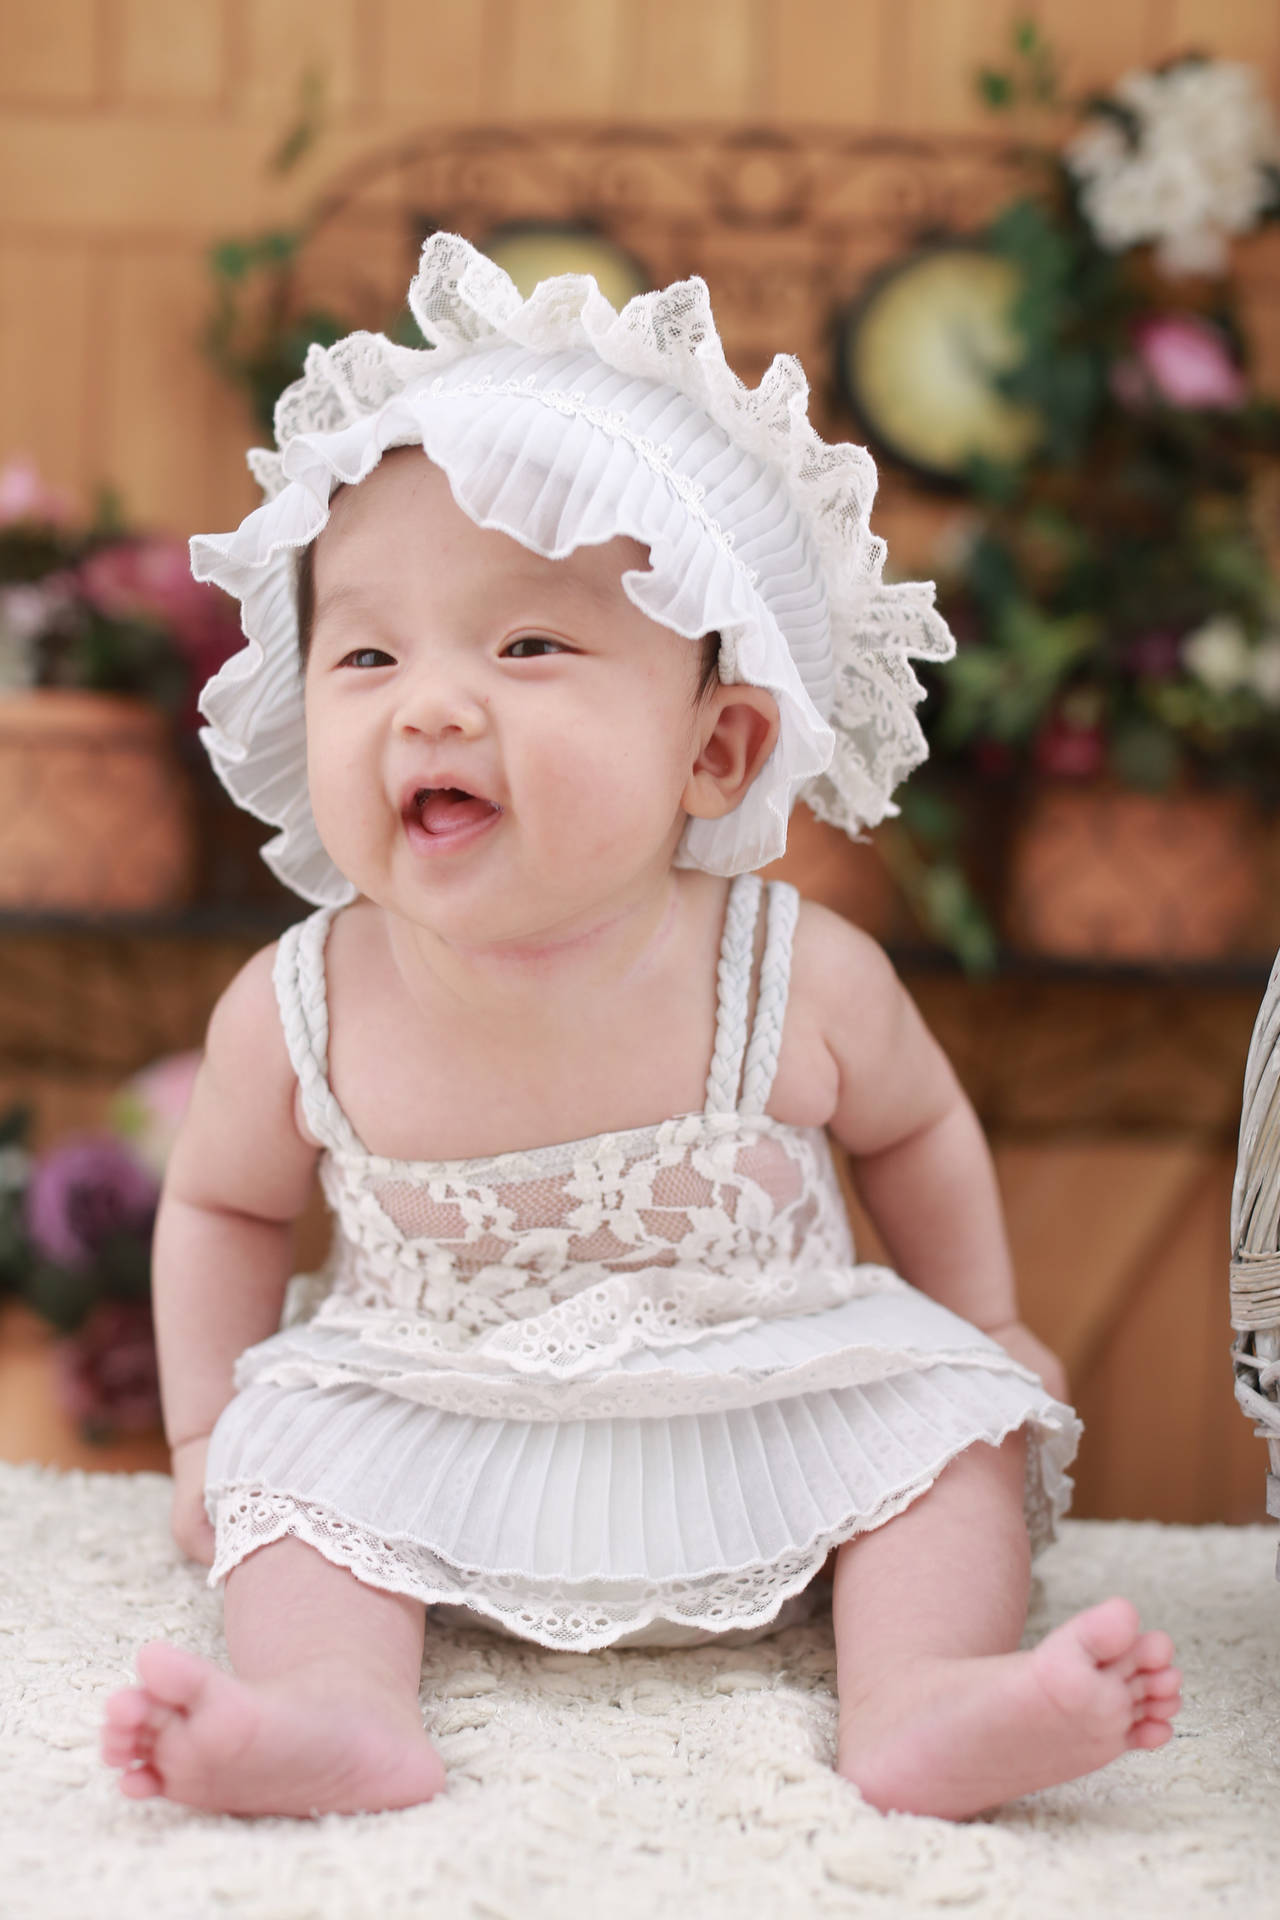 Cute Baby In White Dress And Hairband Wallpaper